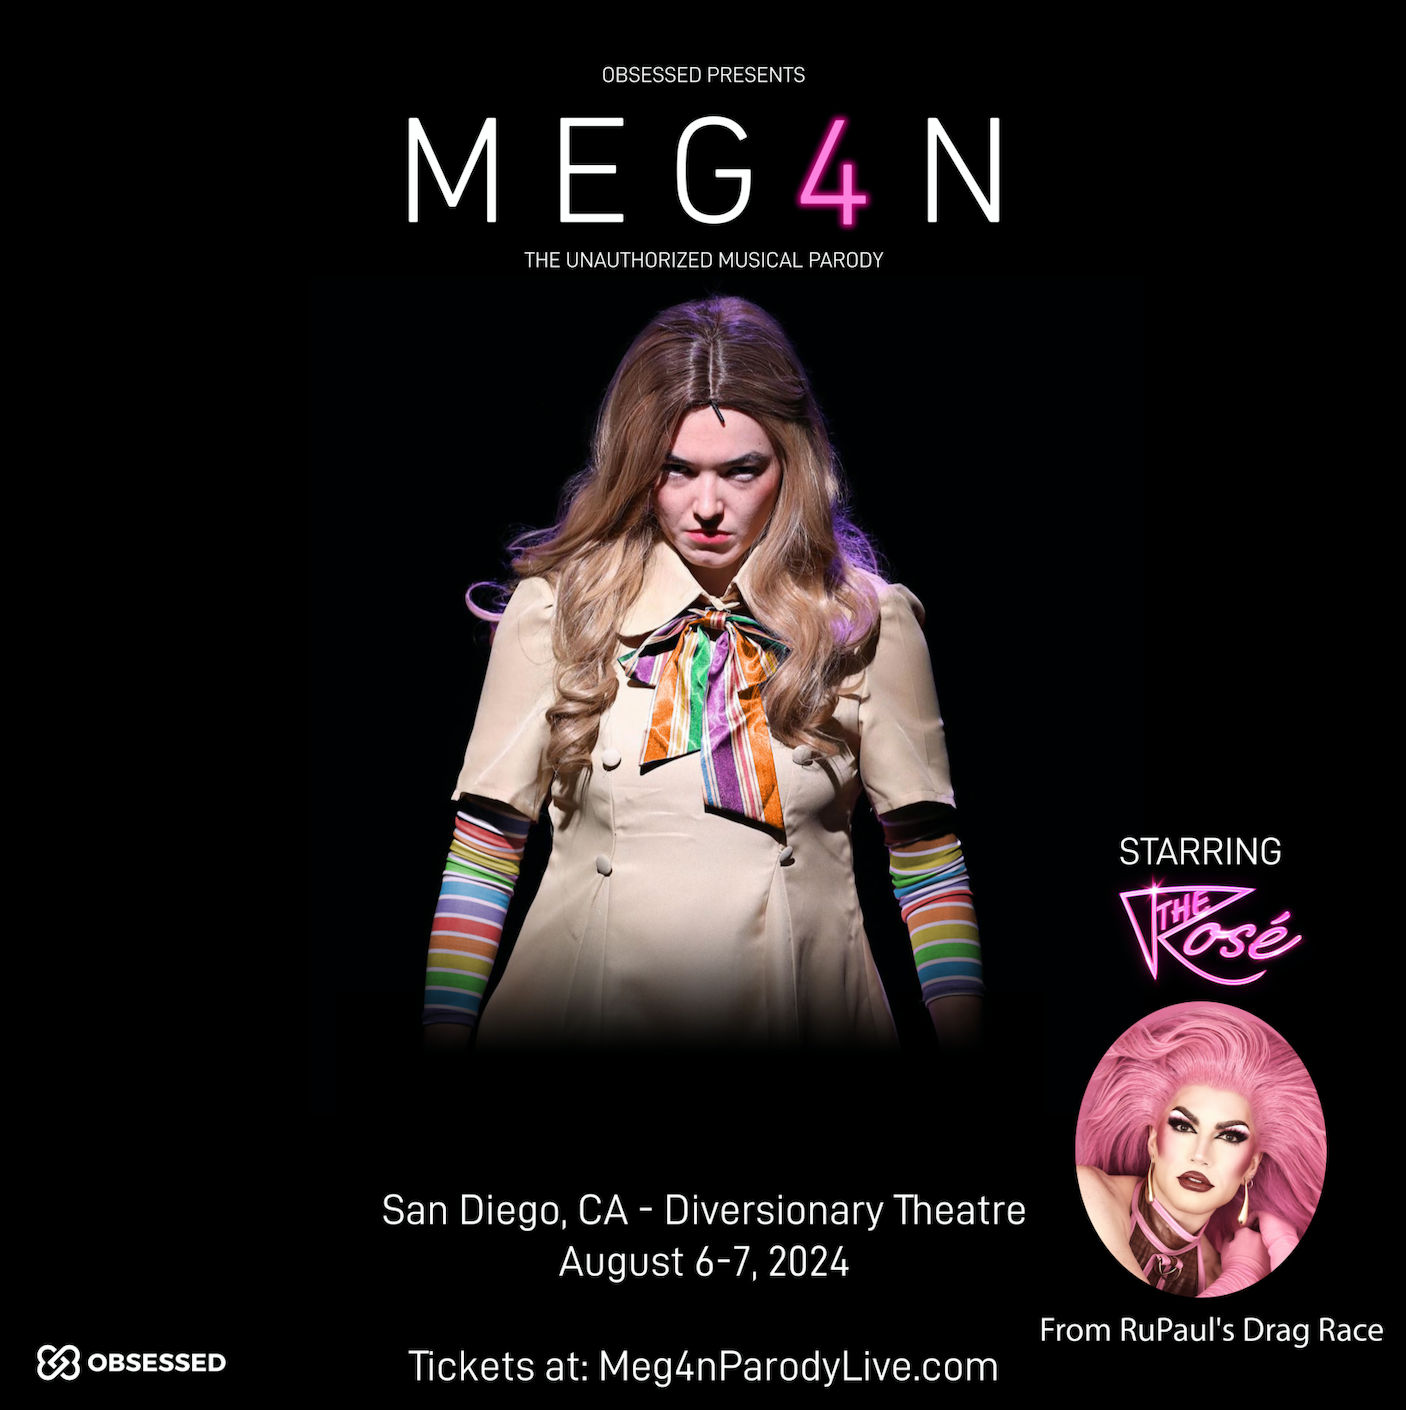 Black background with a picture of a girl starring down into the screen and the text: Meg4n the unauthorized musical parody, with the rose from rupauls drag race